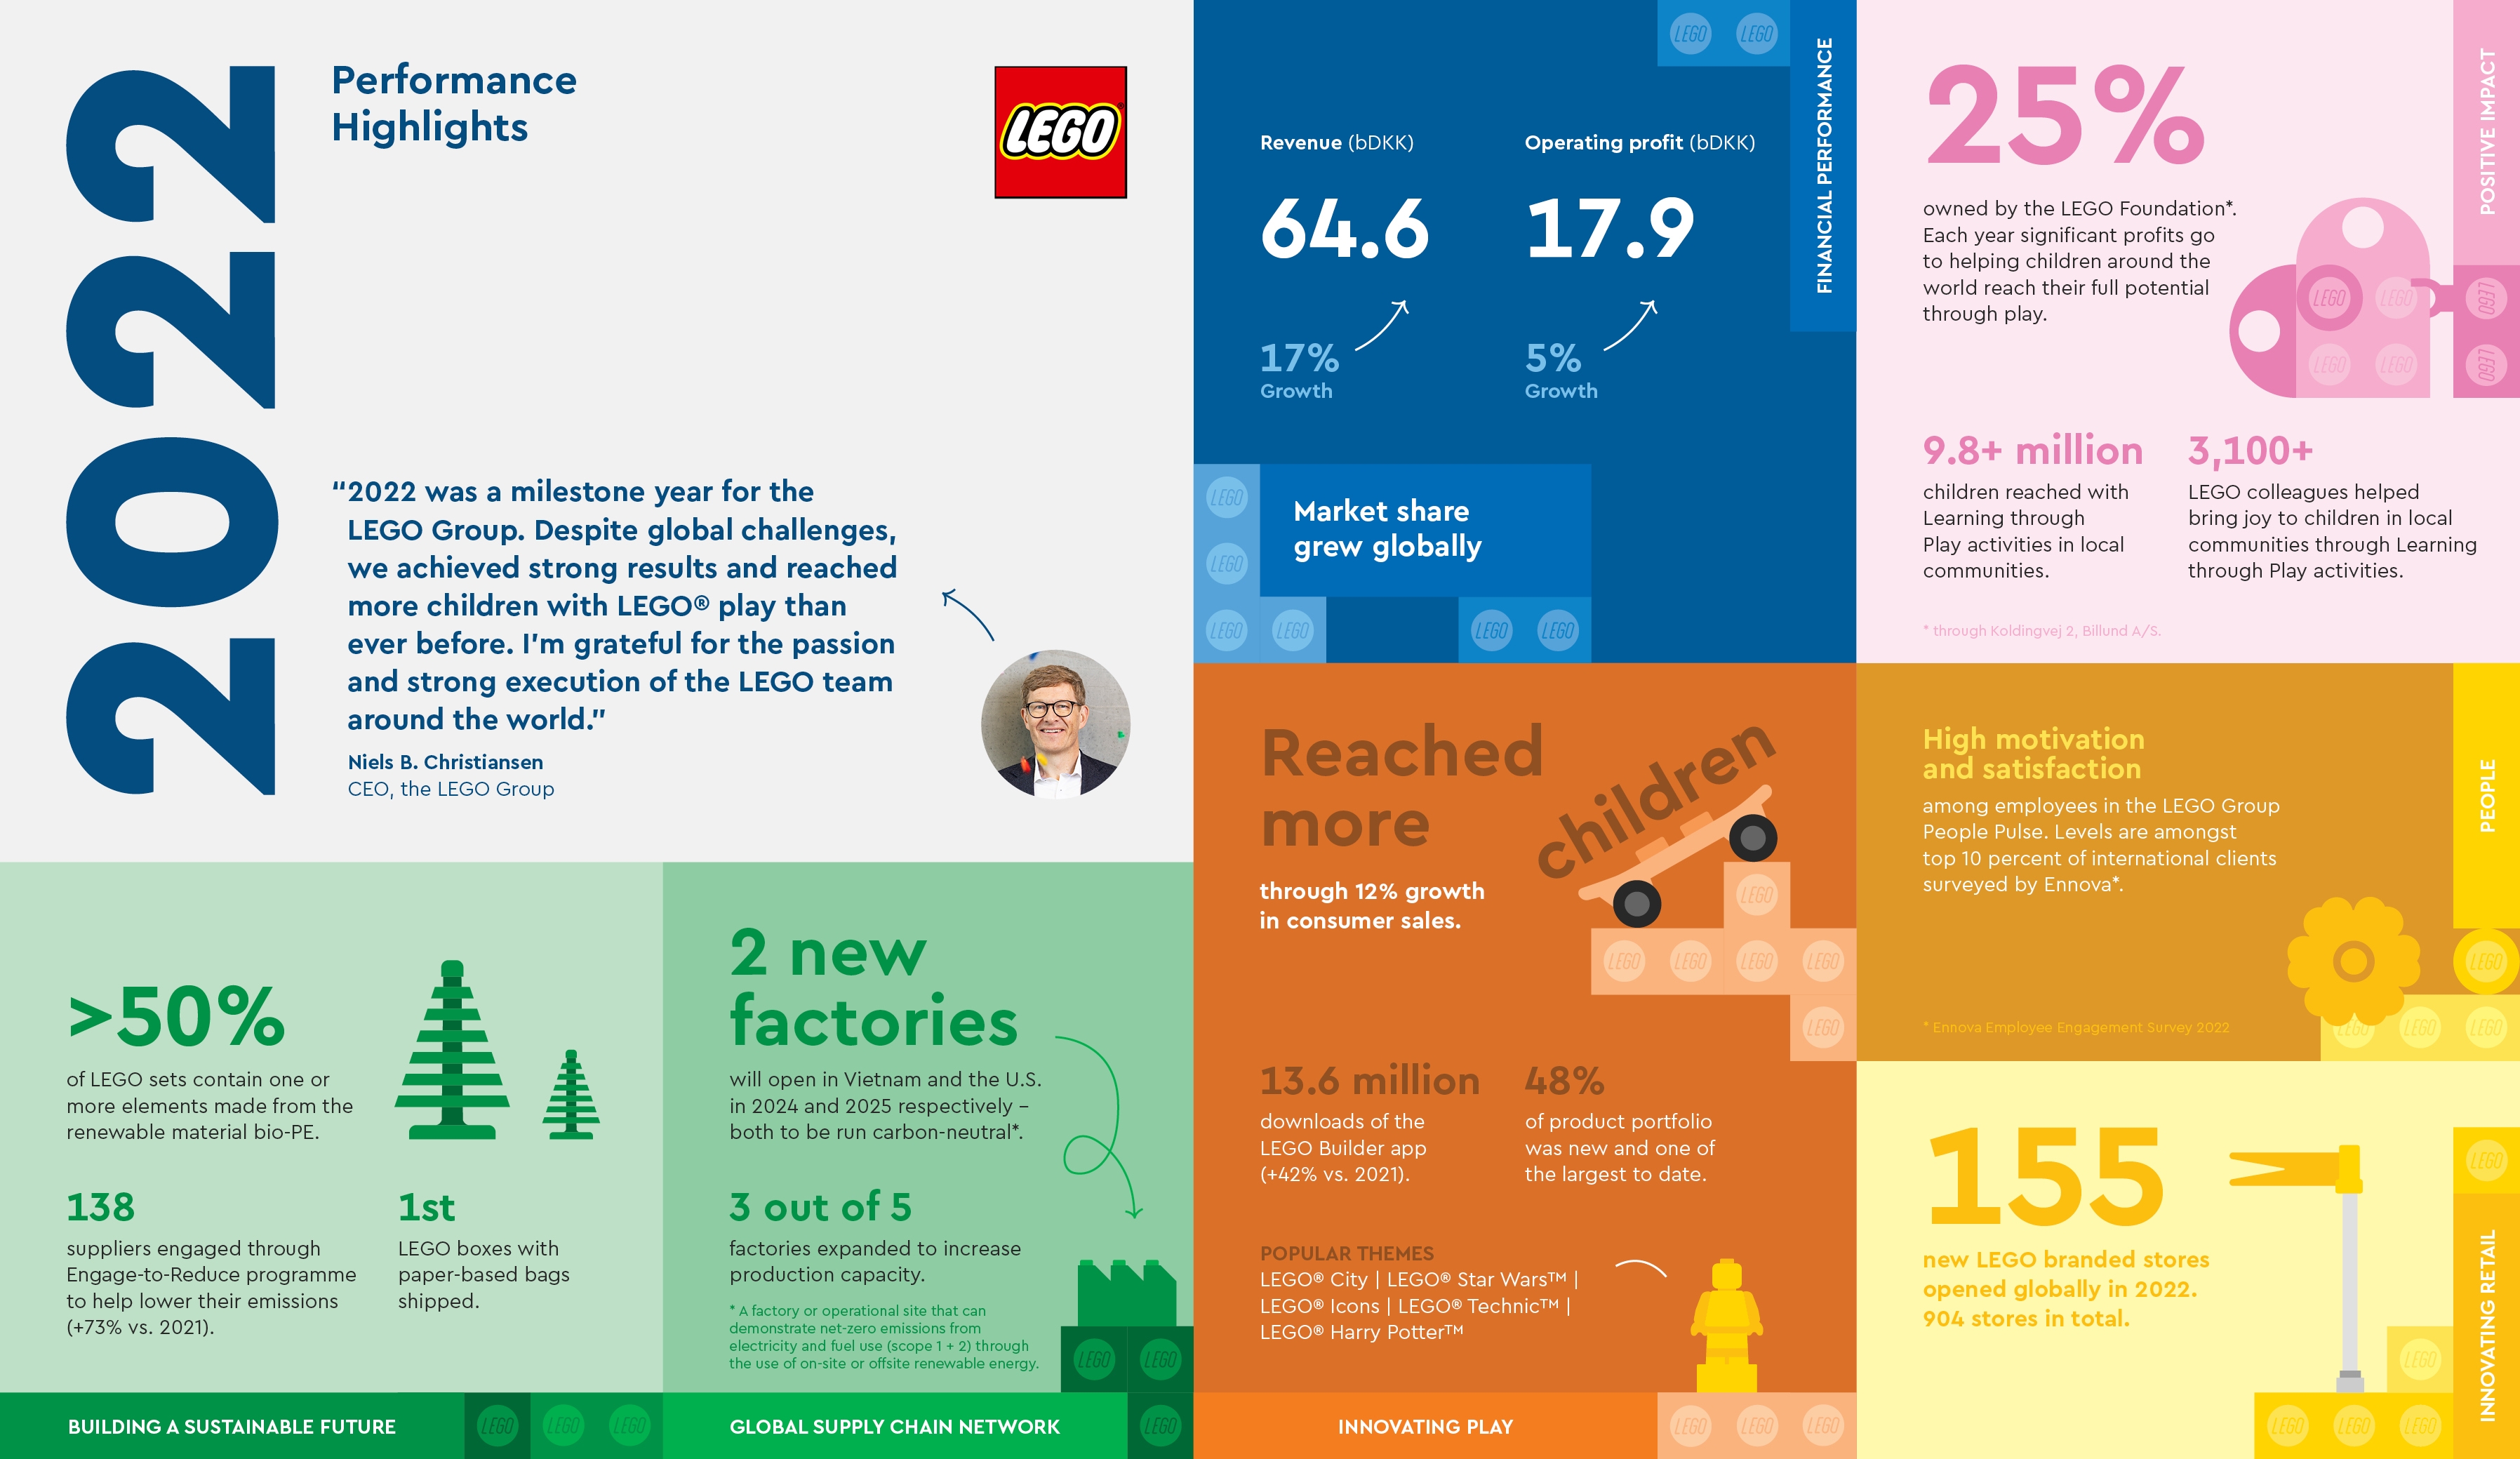 annual results - About - LEGO.com